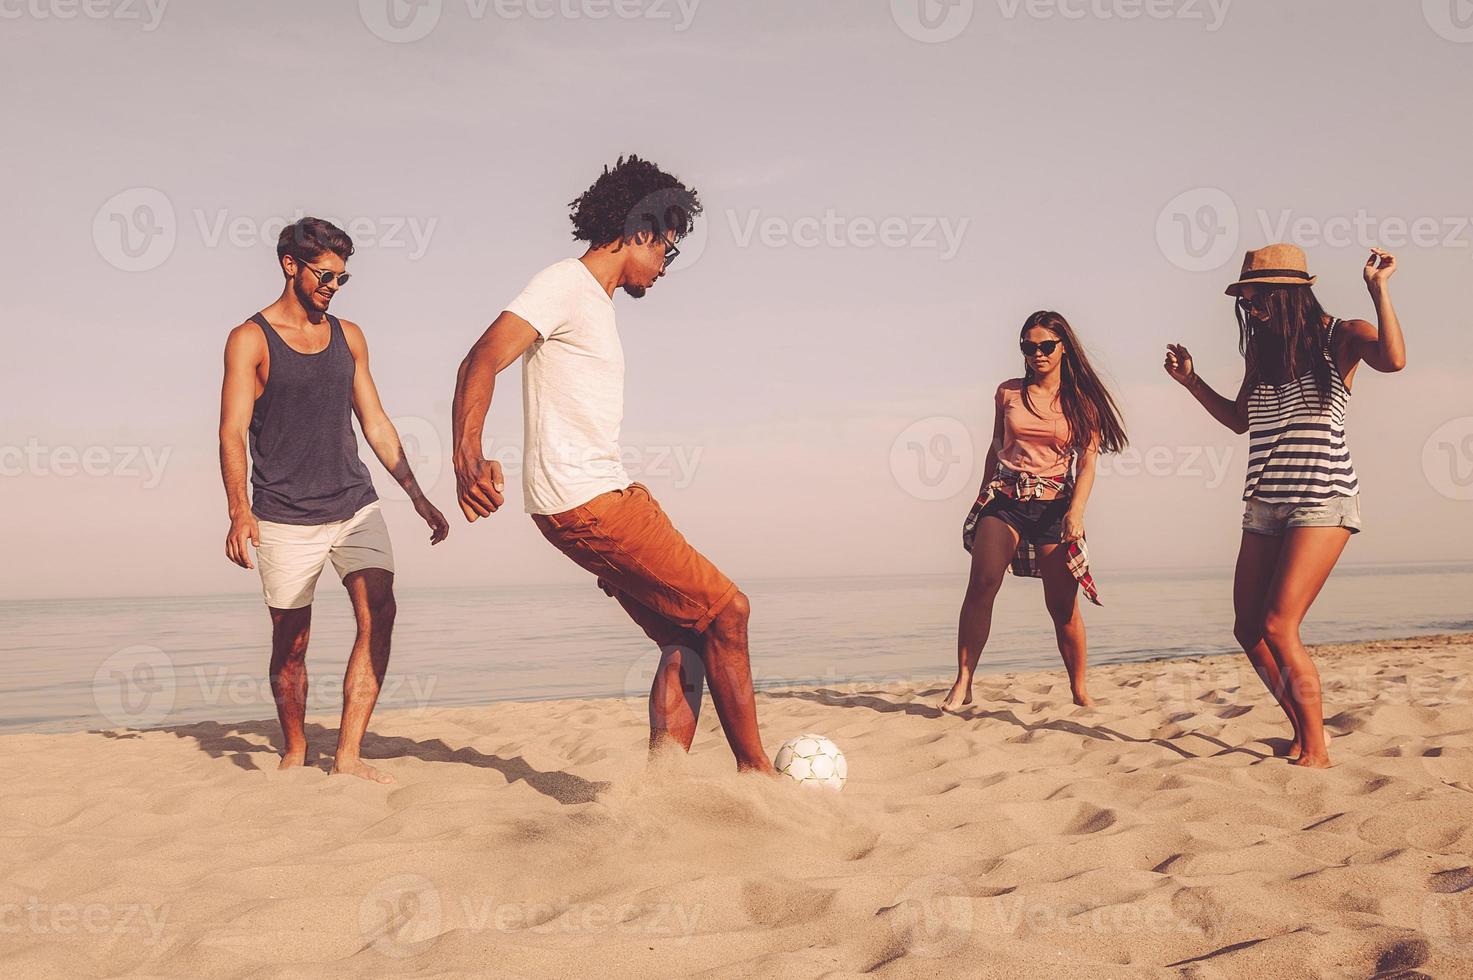 Beach ball. Group of cheerful young people playing with soccer ball on the beach with sea in the background photo